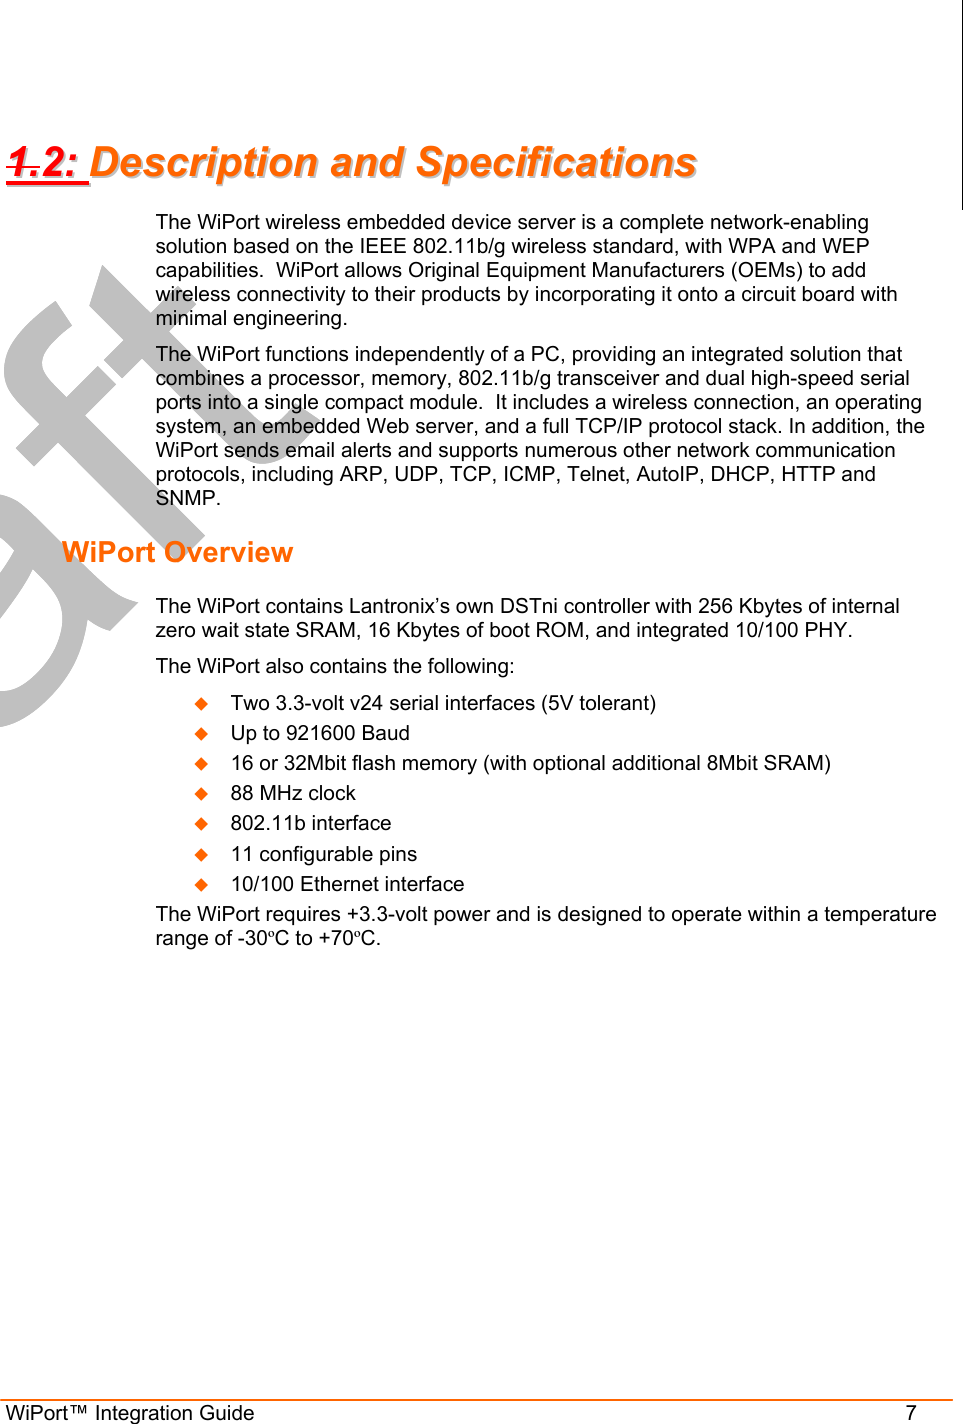  WiPort™ Integration Guide                      7 11..22::  DDeessccrriippttiioonn  aanndd  SSppeecciiffiiccaattiioonnss  The WiPort wireless embedded device server is a complete network-enabling solution based on the IEEE 802.11b/g wireless standard, with WPA and WEP capabilities.  WiPort allows Original Equipment Manufacturers (OEMs) to add wireless connectivity to their products by incorporating it onto a circuit board with minimal engineering. The WiPort functions independently of a PC, providing an integrated solution that combines a processor, memory, 802.11b/g transceiver and dual high-speed serial ports into a single compact module.  It includes a wireless connection, an operating system, an embedded Web server, and a full TCP/IP protocol stack. In addition, the WiPort sends email alerts and supports numerous other network communication protocols, including ARP, UDP, TCP, ICMP, Telnet, AutoIP, DHCP, HTTP and SNMP. WiPort Overview The WiPort contains Lantronix’s own DSTni controller with 256 Kbytes of internal zero wait state SRAM, 16 Kbytes of boot ROM, and integrated 10/100 PHY.  The WiPort also contains the following:   Two 3.3-volt v24 serial interfaces (5V tolerant)   Up to 921600 Baud   16 or 32Mbit flash memory (with optional additional 8Mbit SRAM)   88 MHz clock   802.11b interface    11 configurable pins   10/100 Ethernet interface The WiPort requires +3.3-volt power and is designed to operate within a temperature range of -30ºC to +70ºC.  